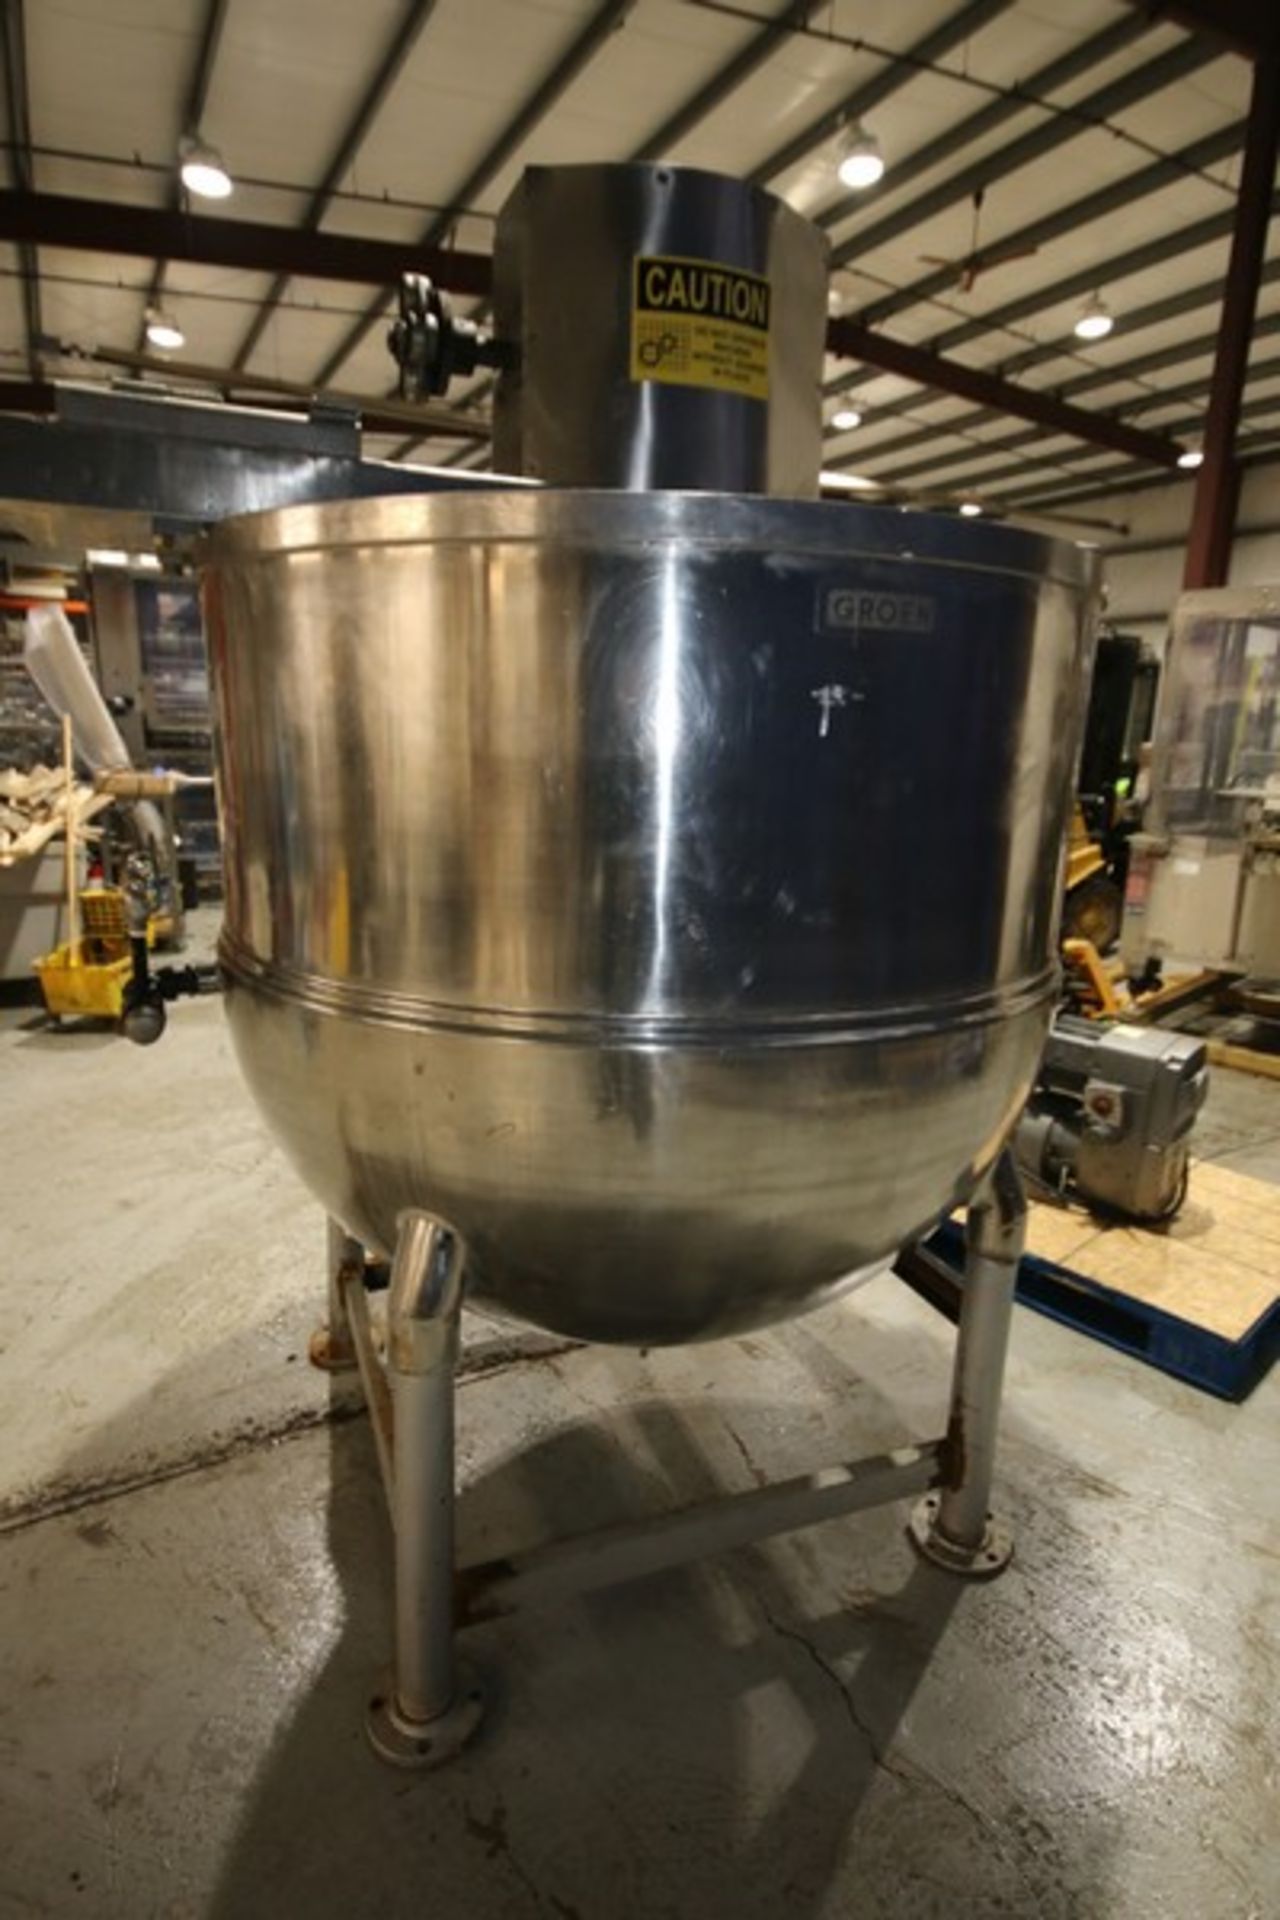 Groen 500 Gallon Jacketed S/S Kettle, Model 500, SN & BN 23122, with Bottom & Side Scrape Surface - Image 8 of 16